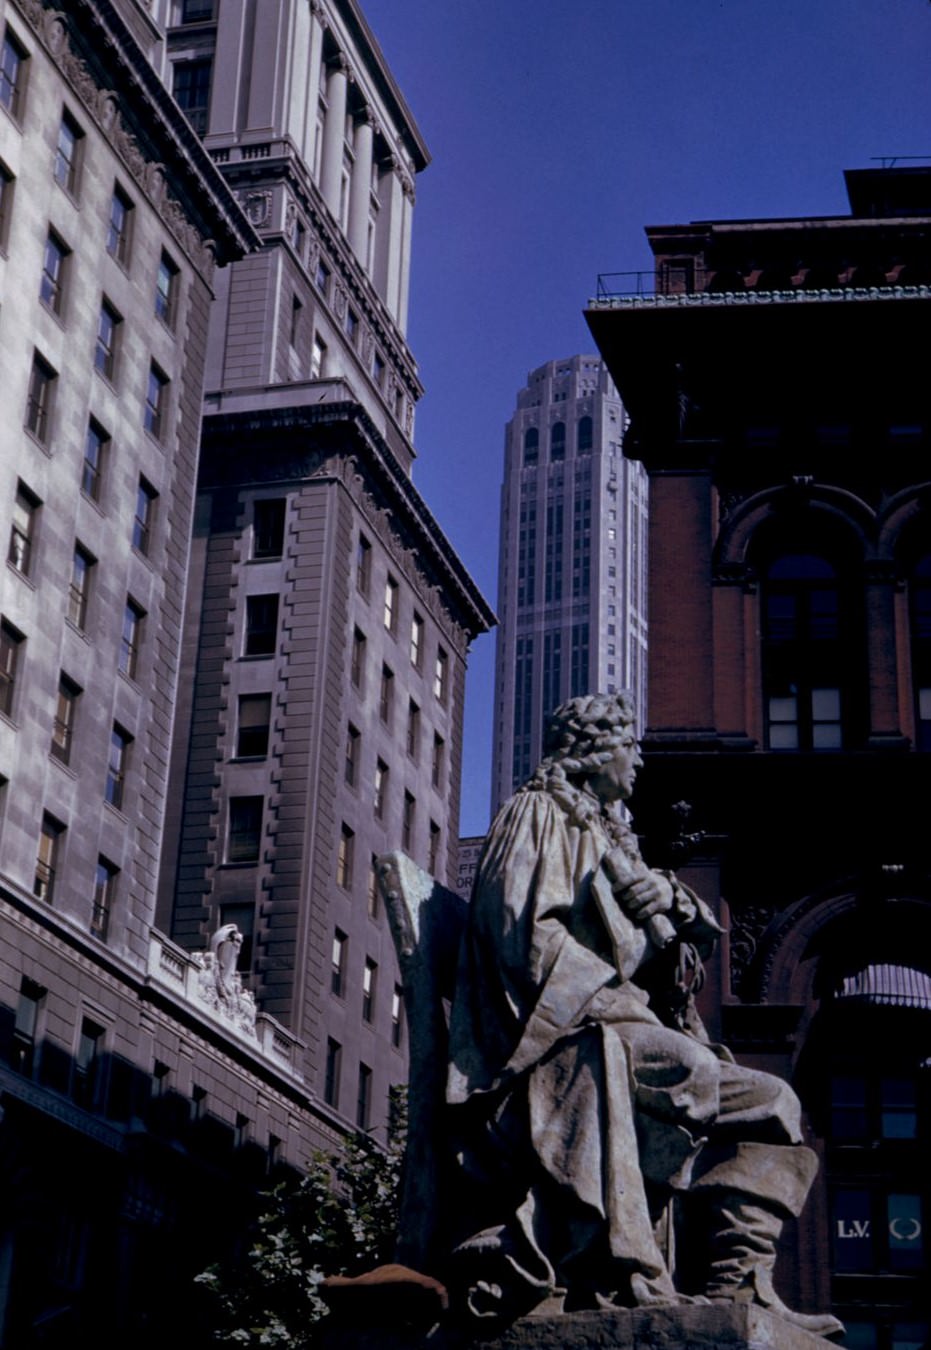 The Vibrant Life And Landmarks Of New York City From 1940S To 1960S Through Charles Cushman’s Lens